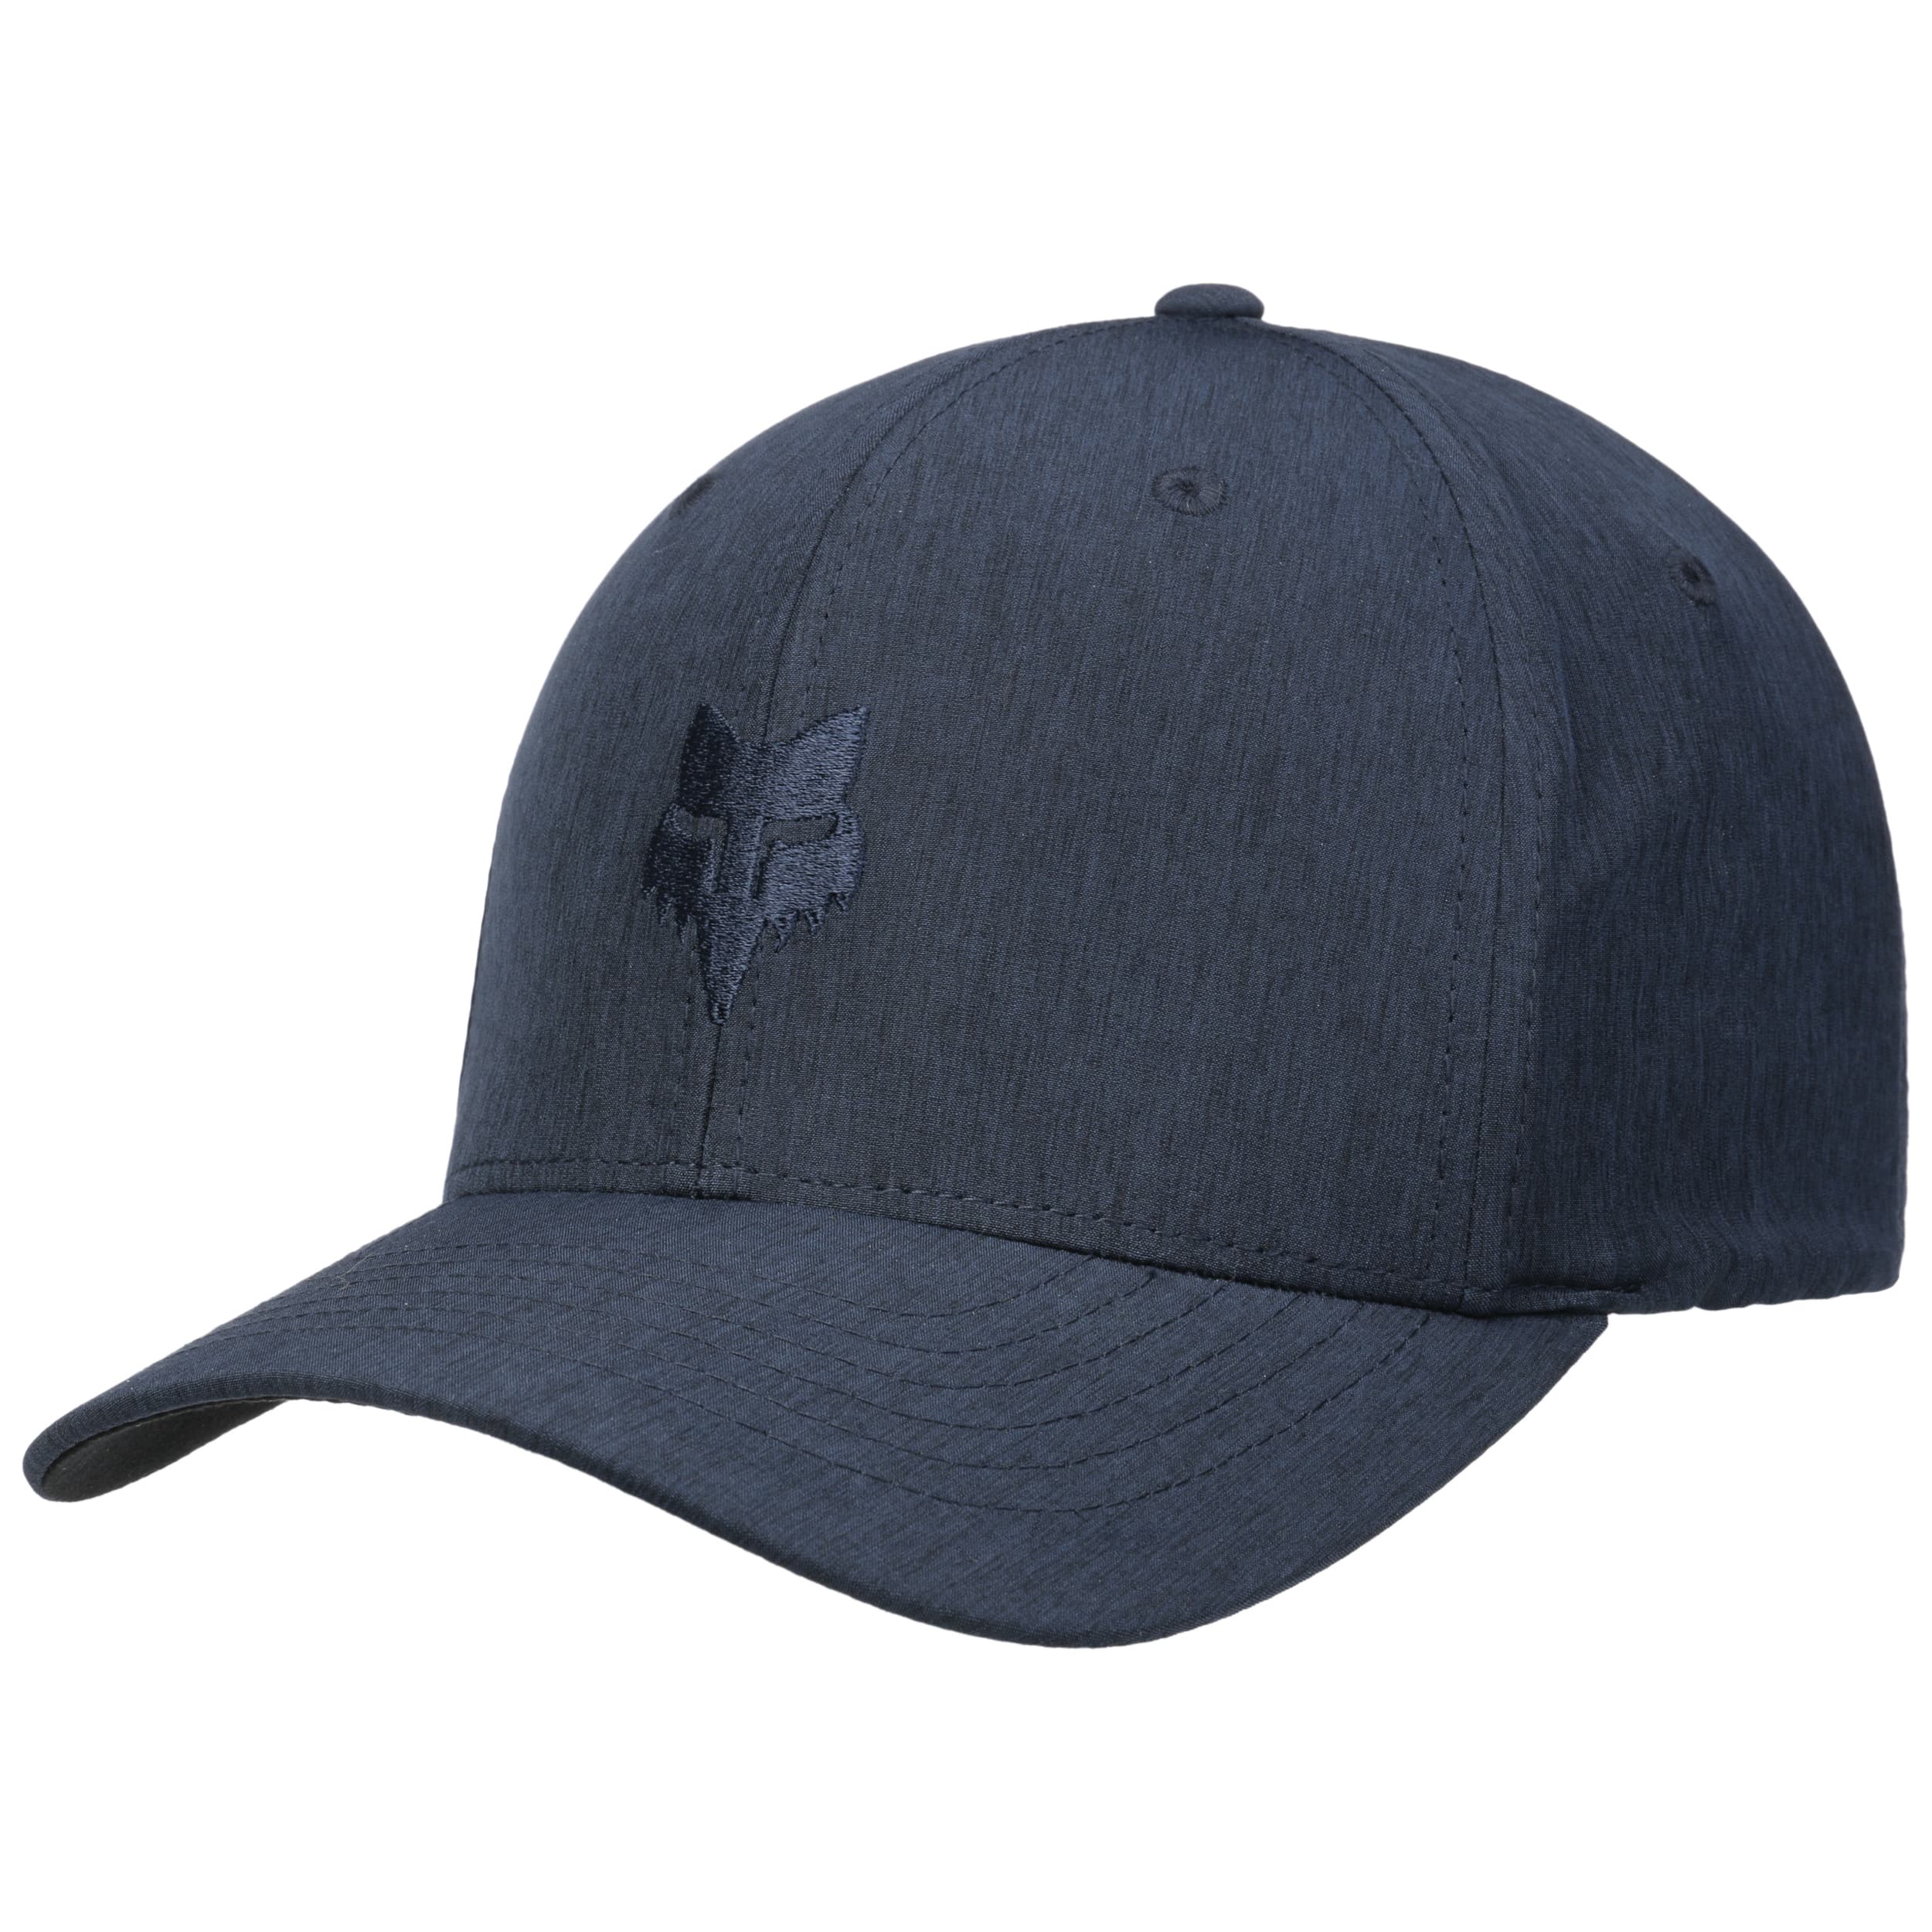 Under Armour Baseball Hat Blitzing Gray Lines Snap Back Pro Fit